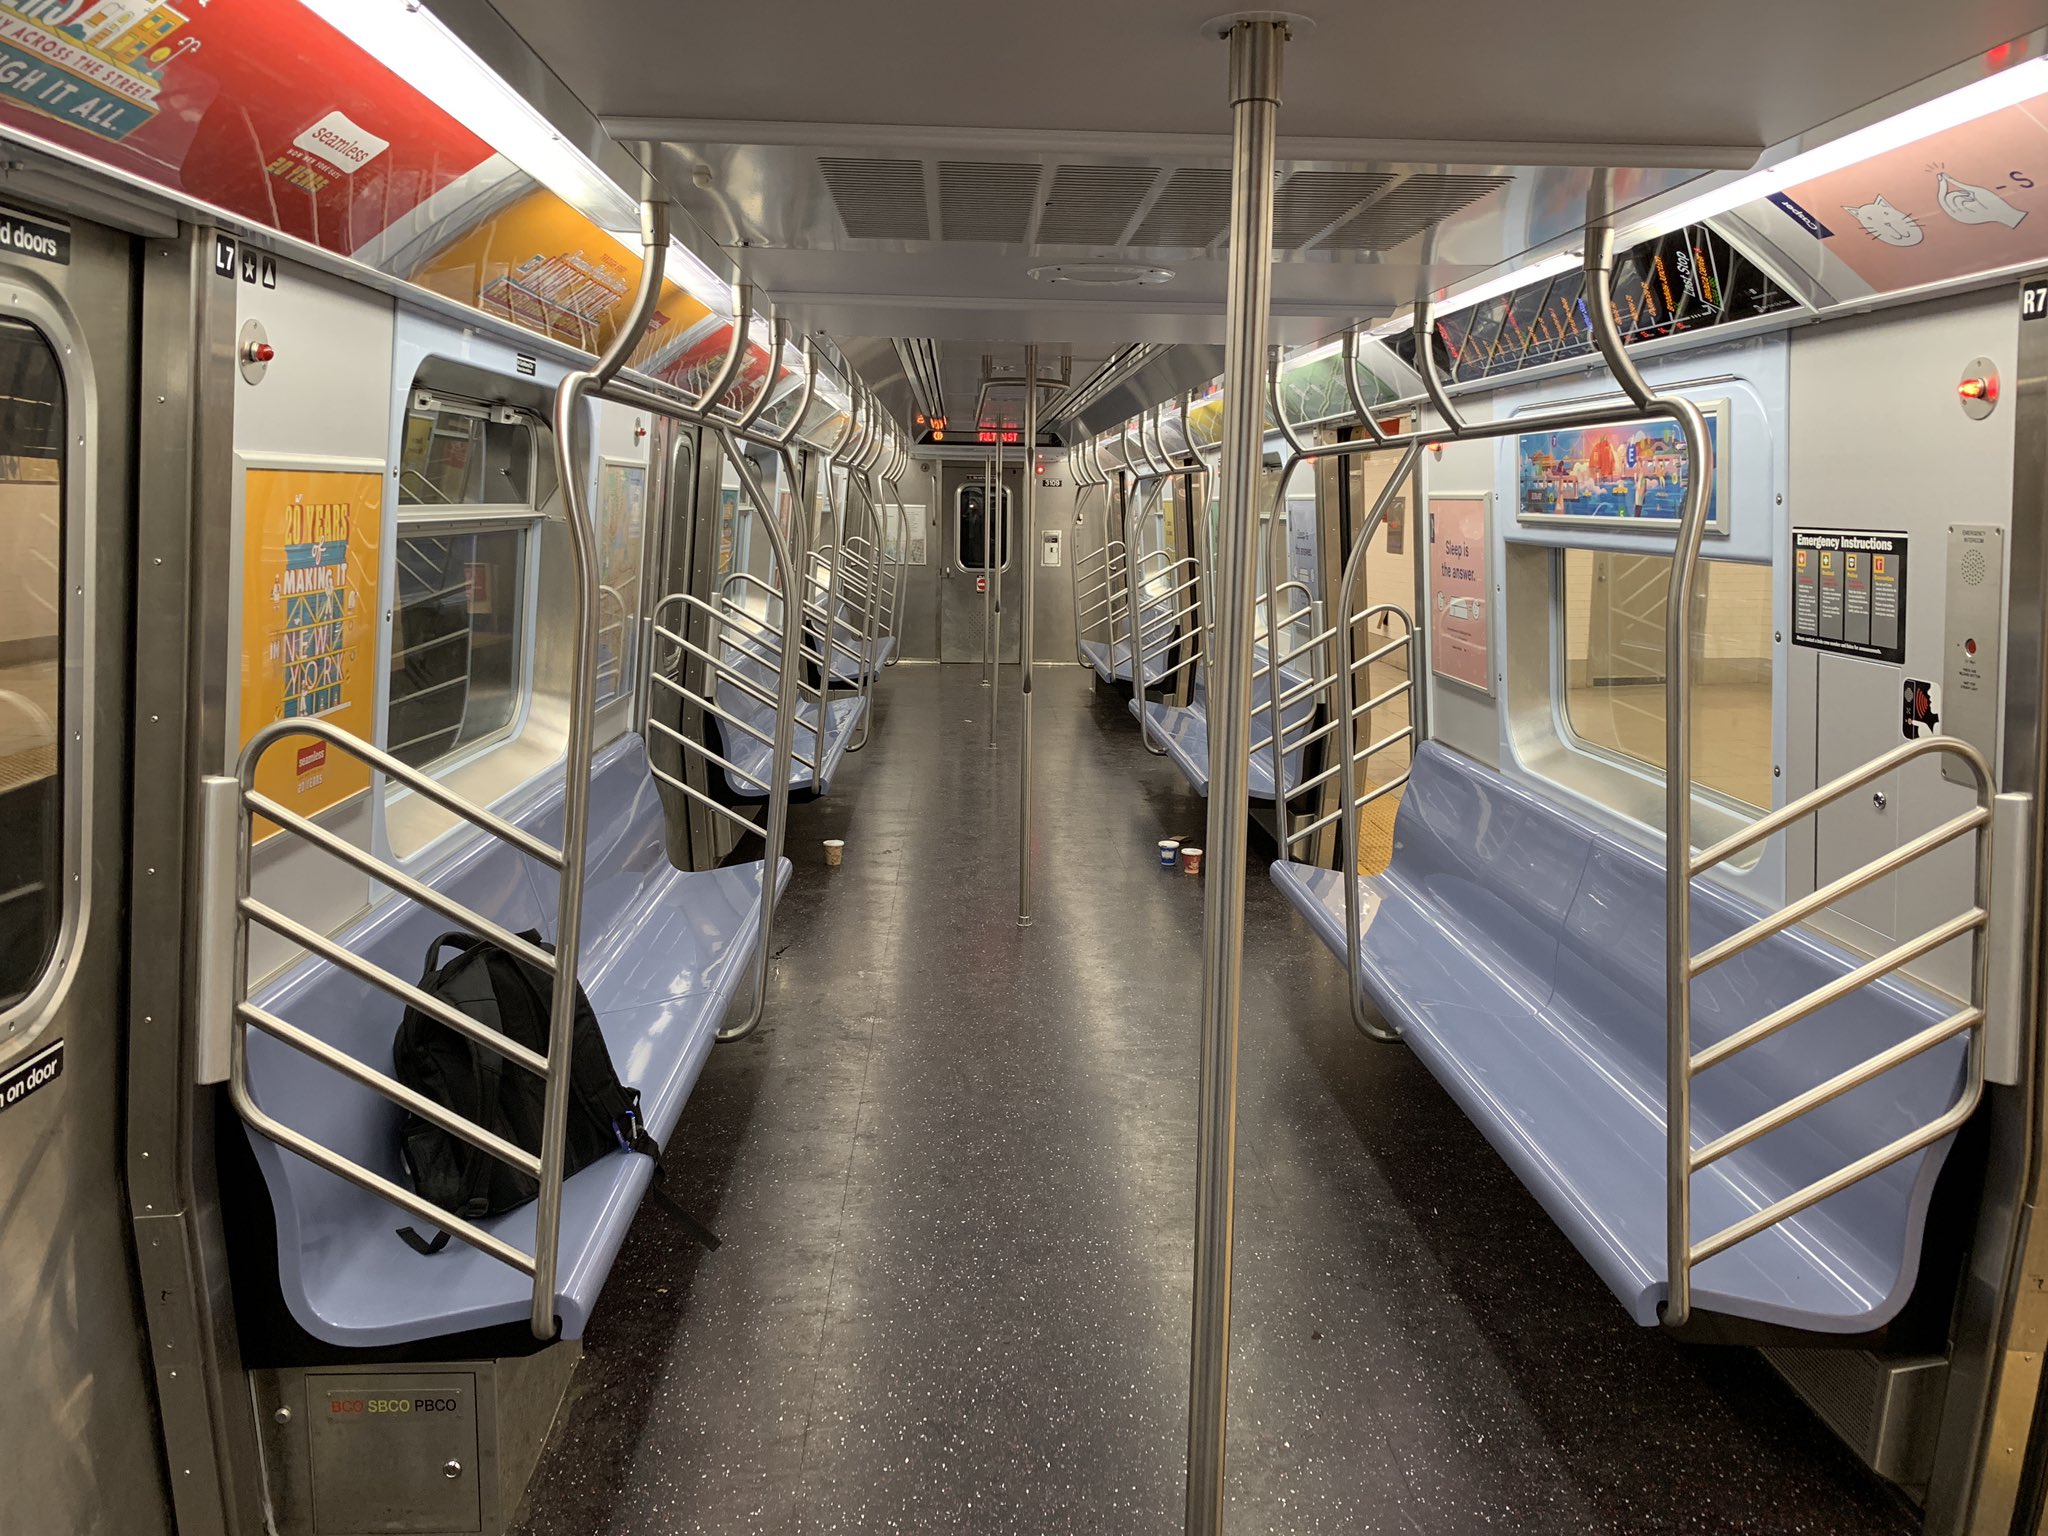 “Why do empty subway cars make me nervous?” 